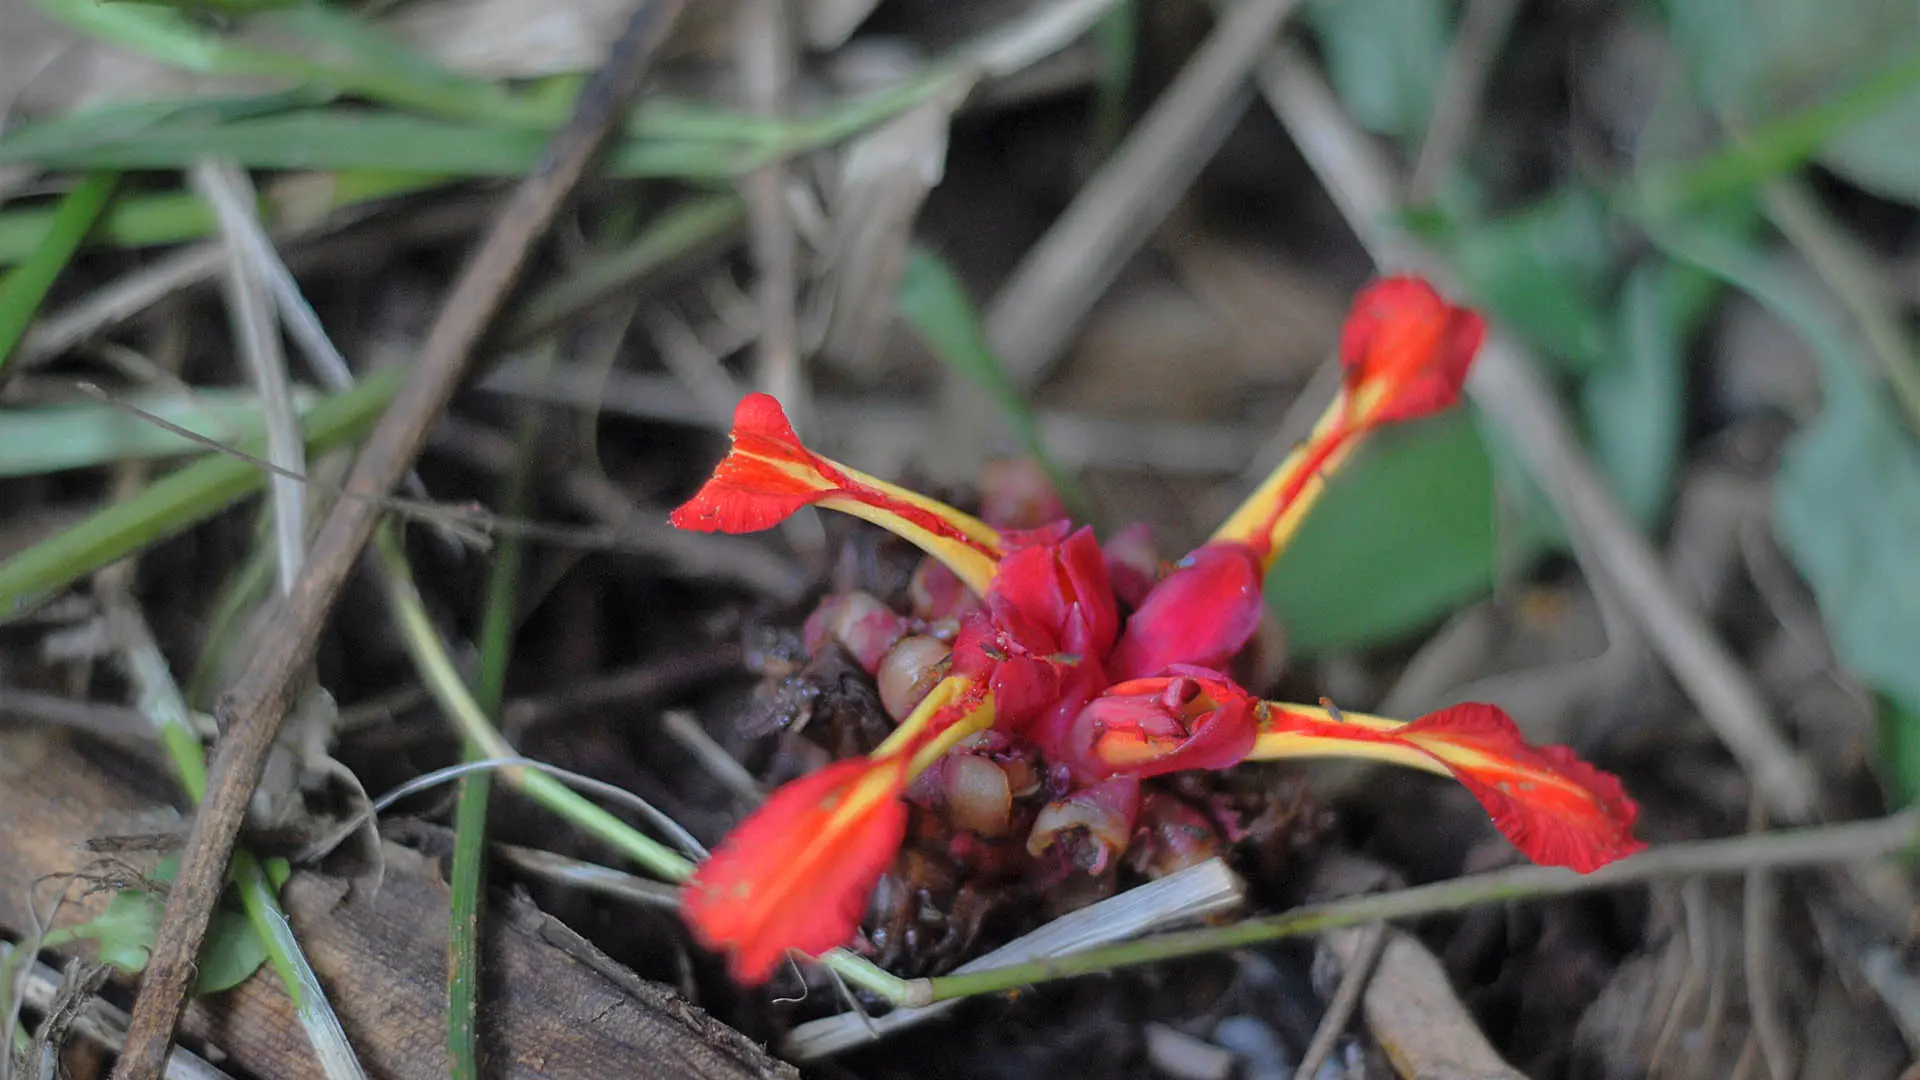 A red and yellow puar flower with four long, unfurled petals grows on the forest floor. 